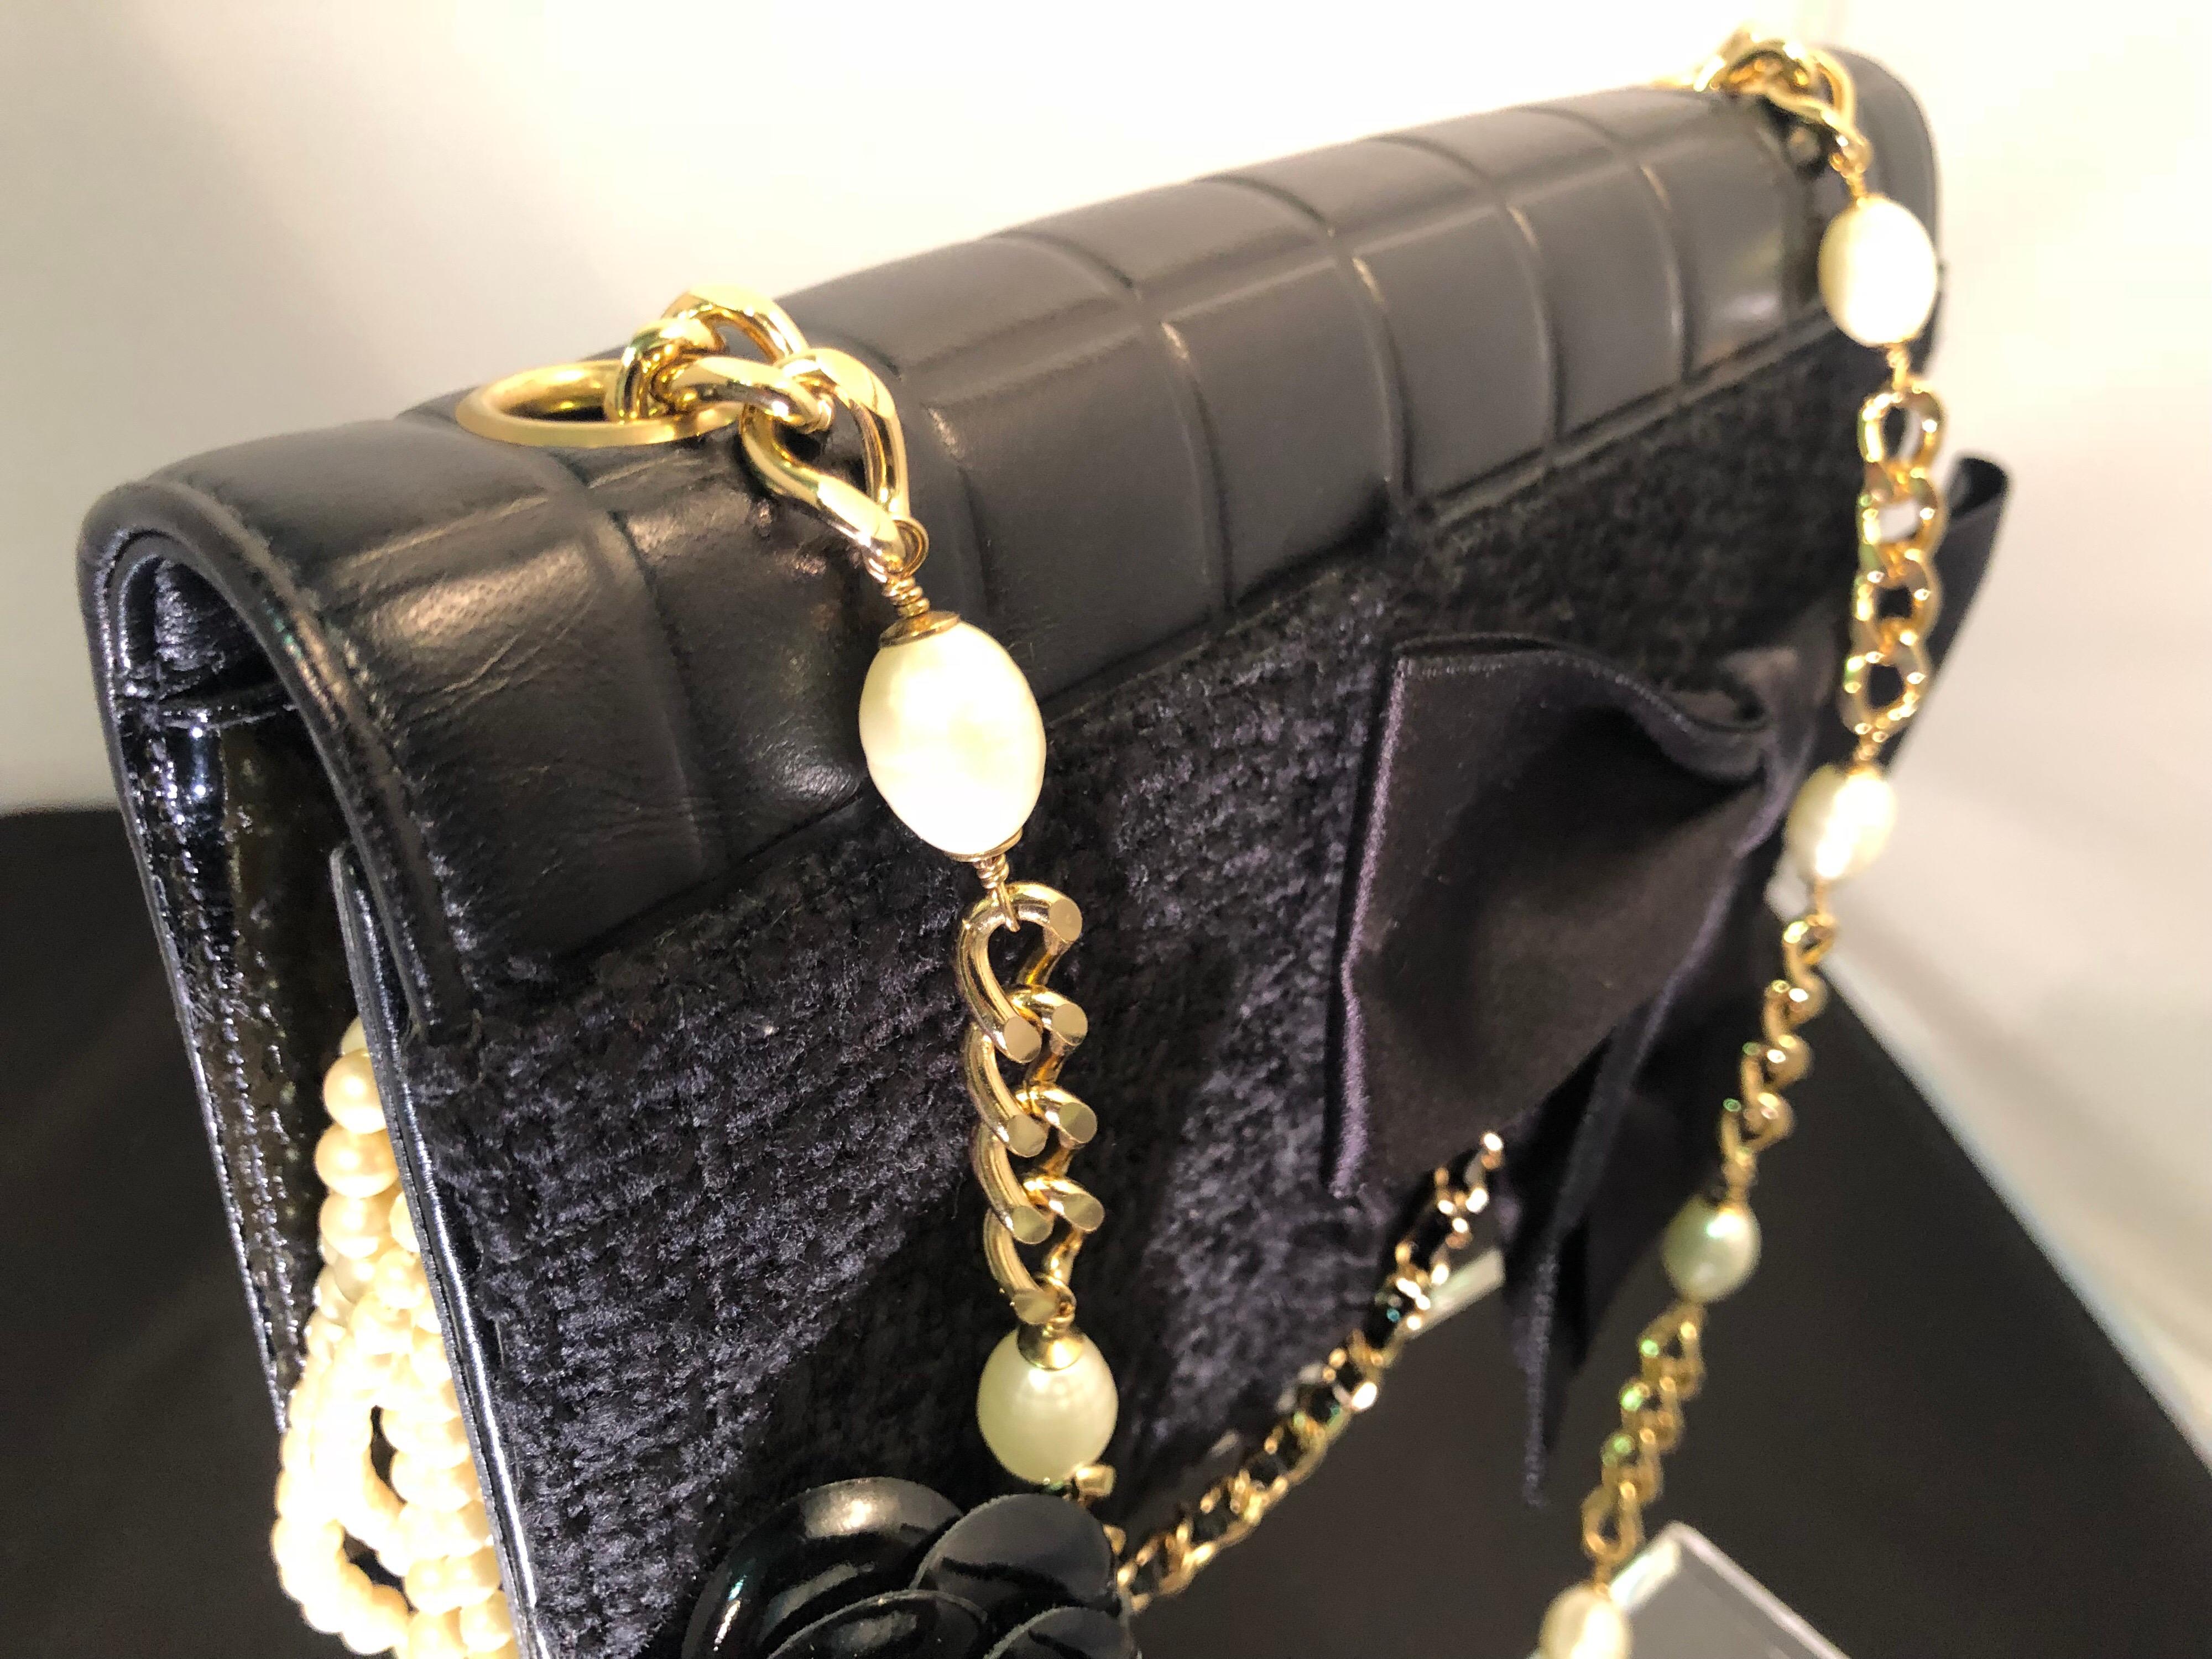 Chanel Black Boucle / Kid Leather Handbag with Camellia and CC Pearls 4